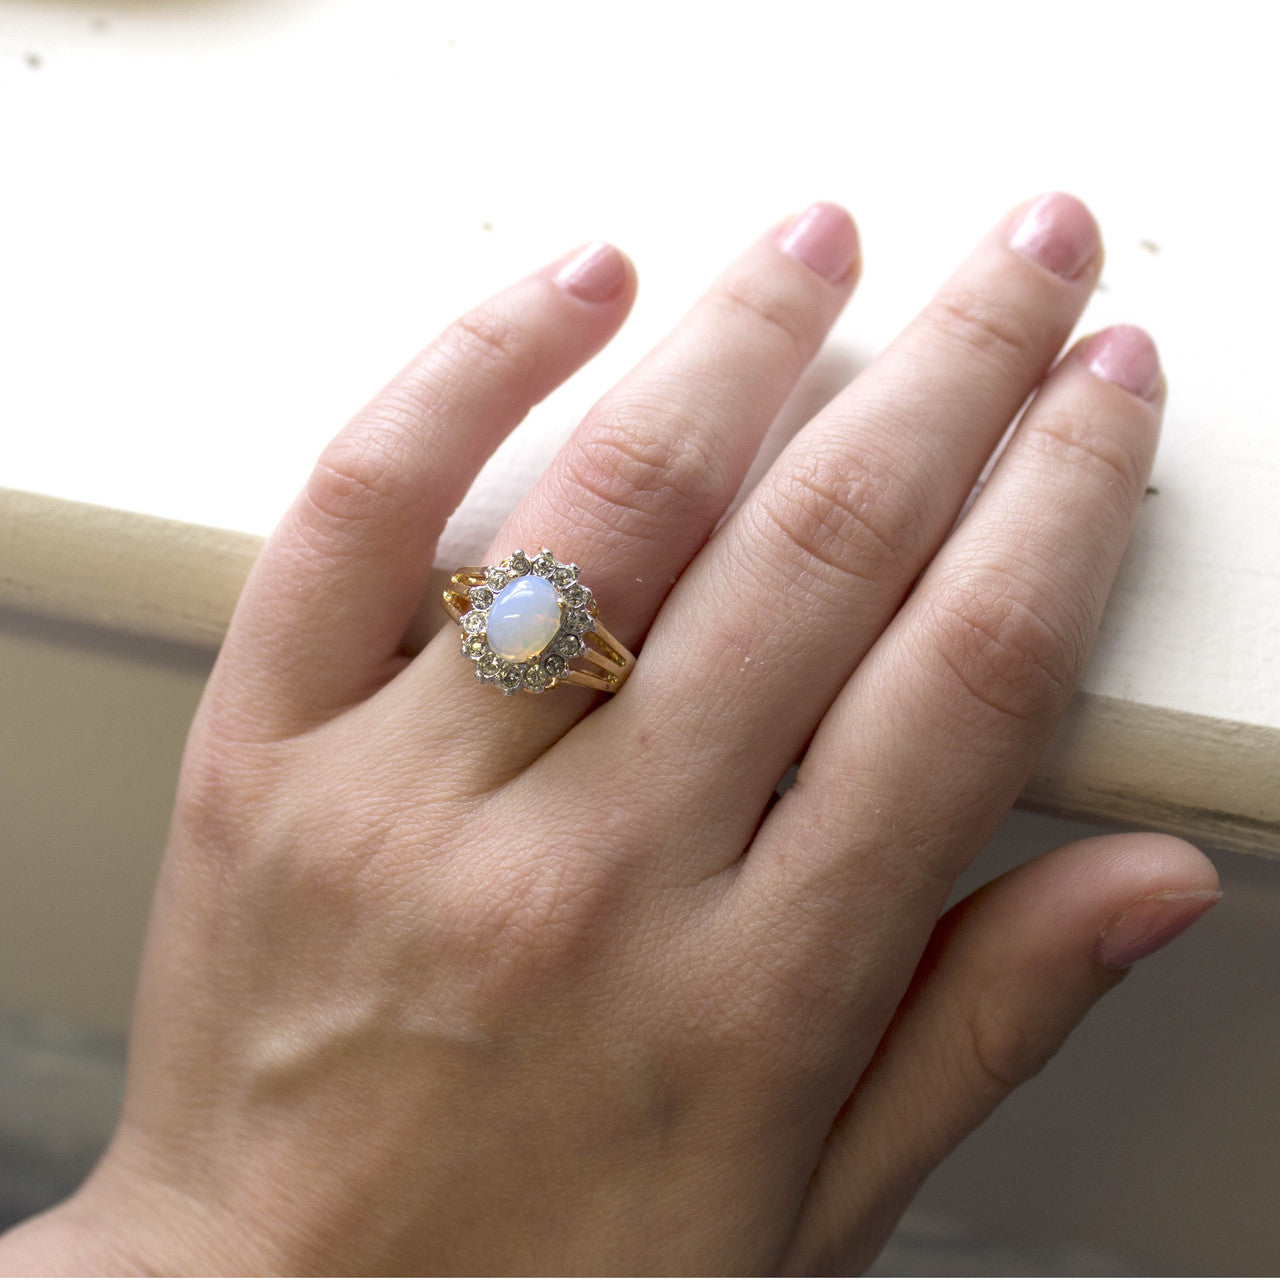 Vintage Pinfire Opal Ring - Clear Austrian Crystals - 18k Yellow Gold Electroplated - October Birthstone - Made in the USA